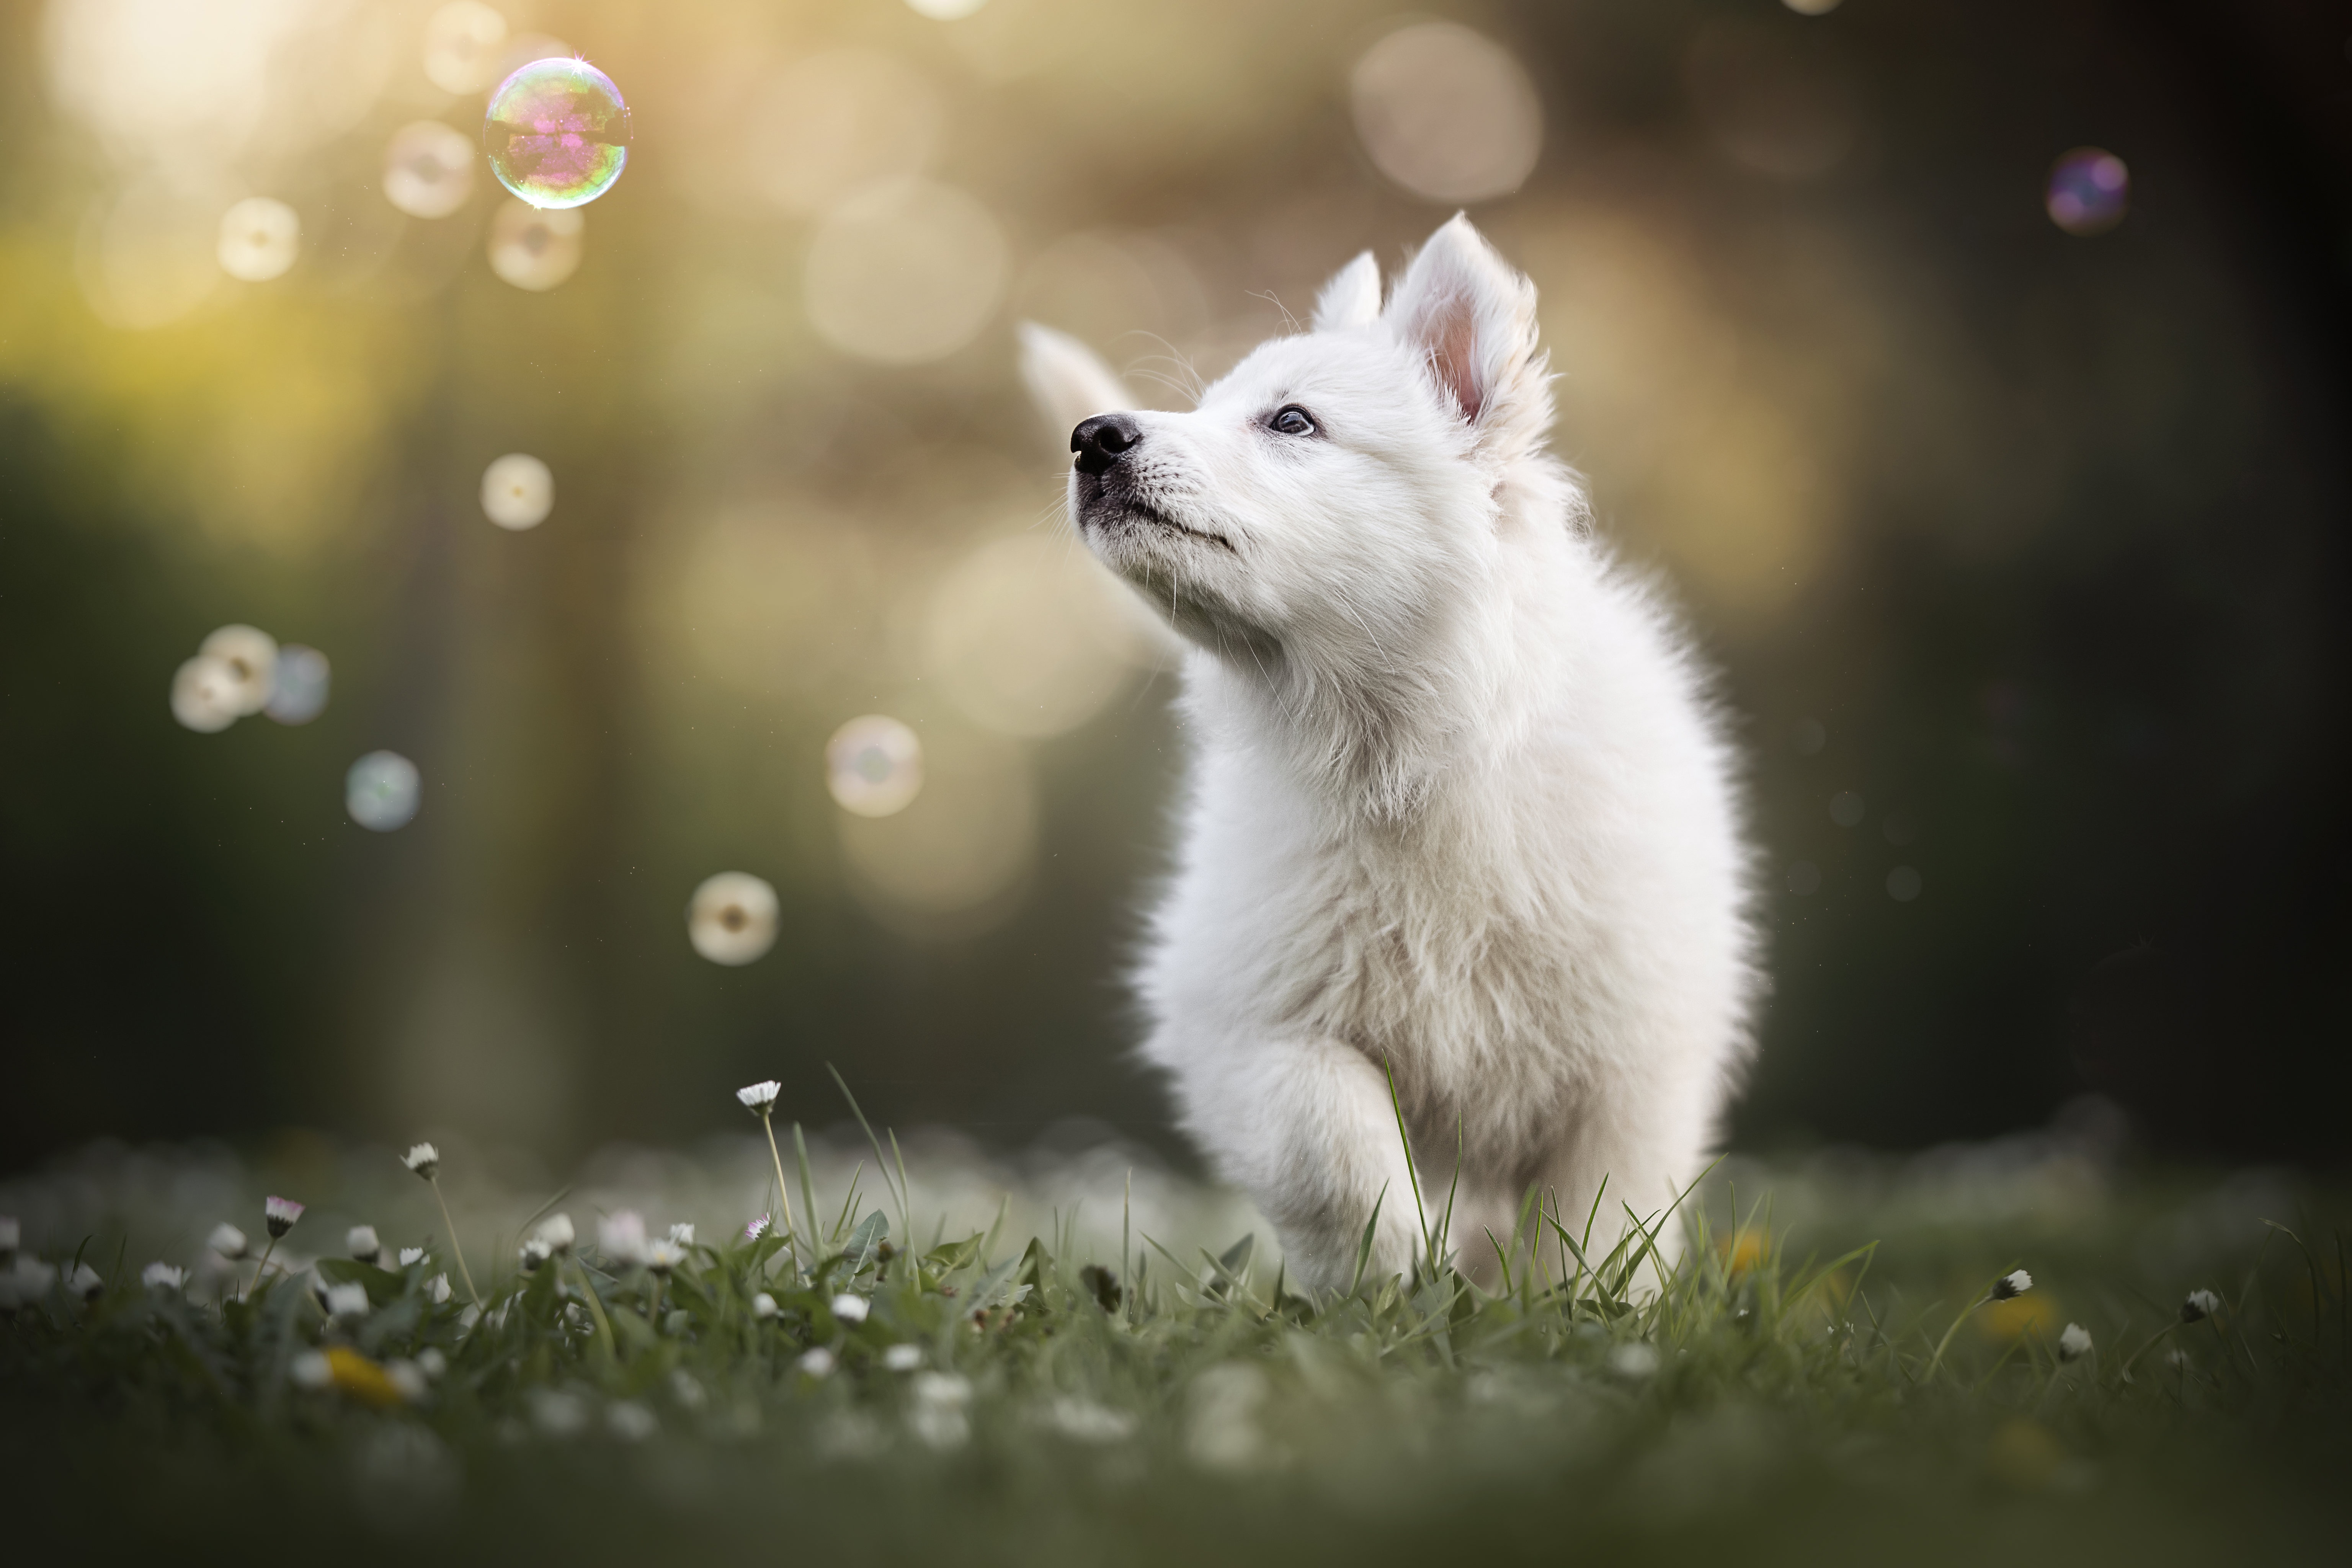 4K Puppy Wallpapers